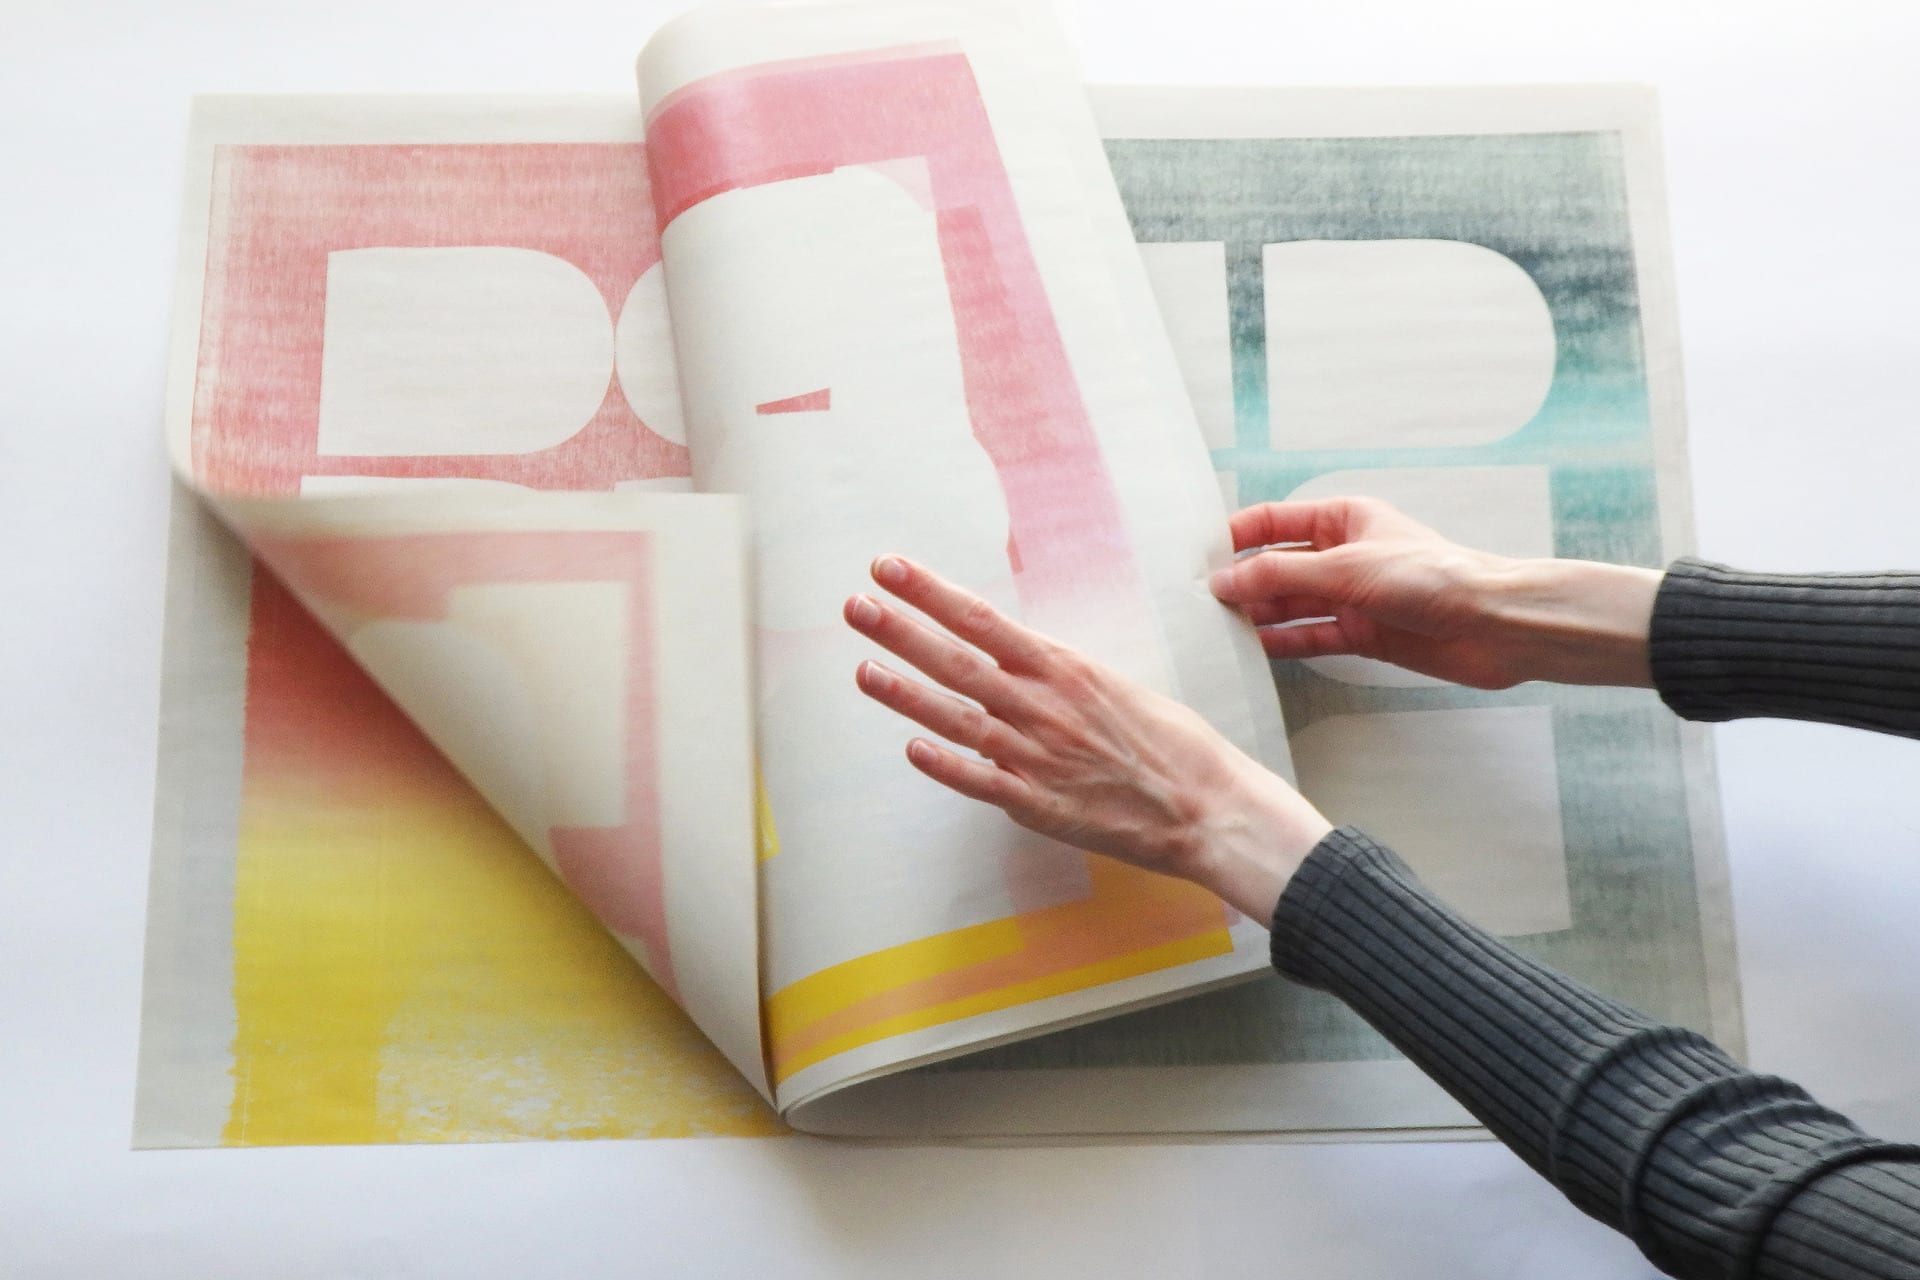 Pages of a book being flipped through, showing woodblock prints of cut out shapes and yellow, pink and green gradients.